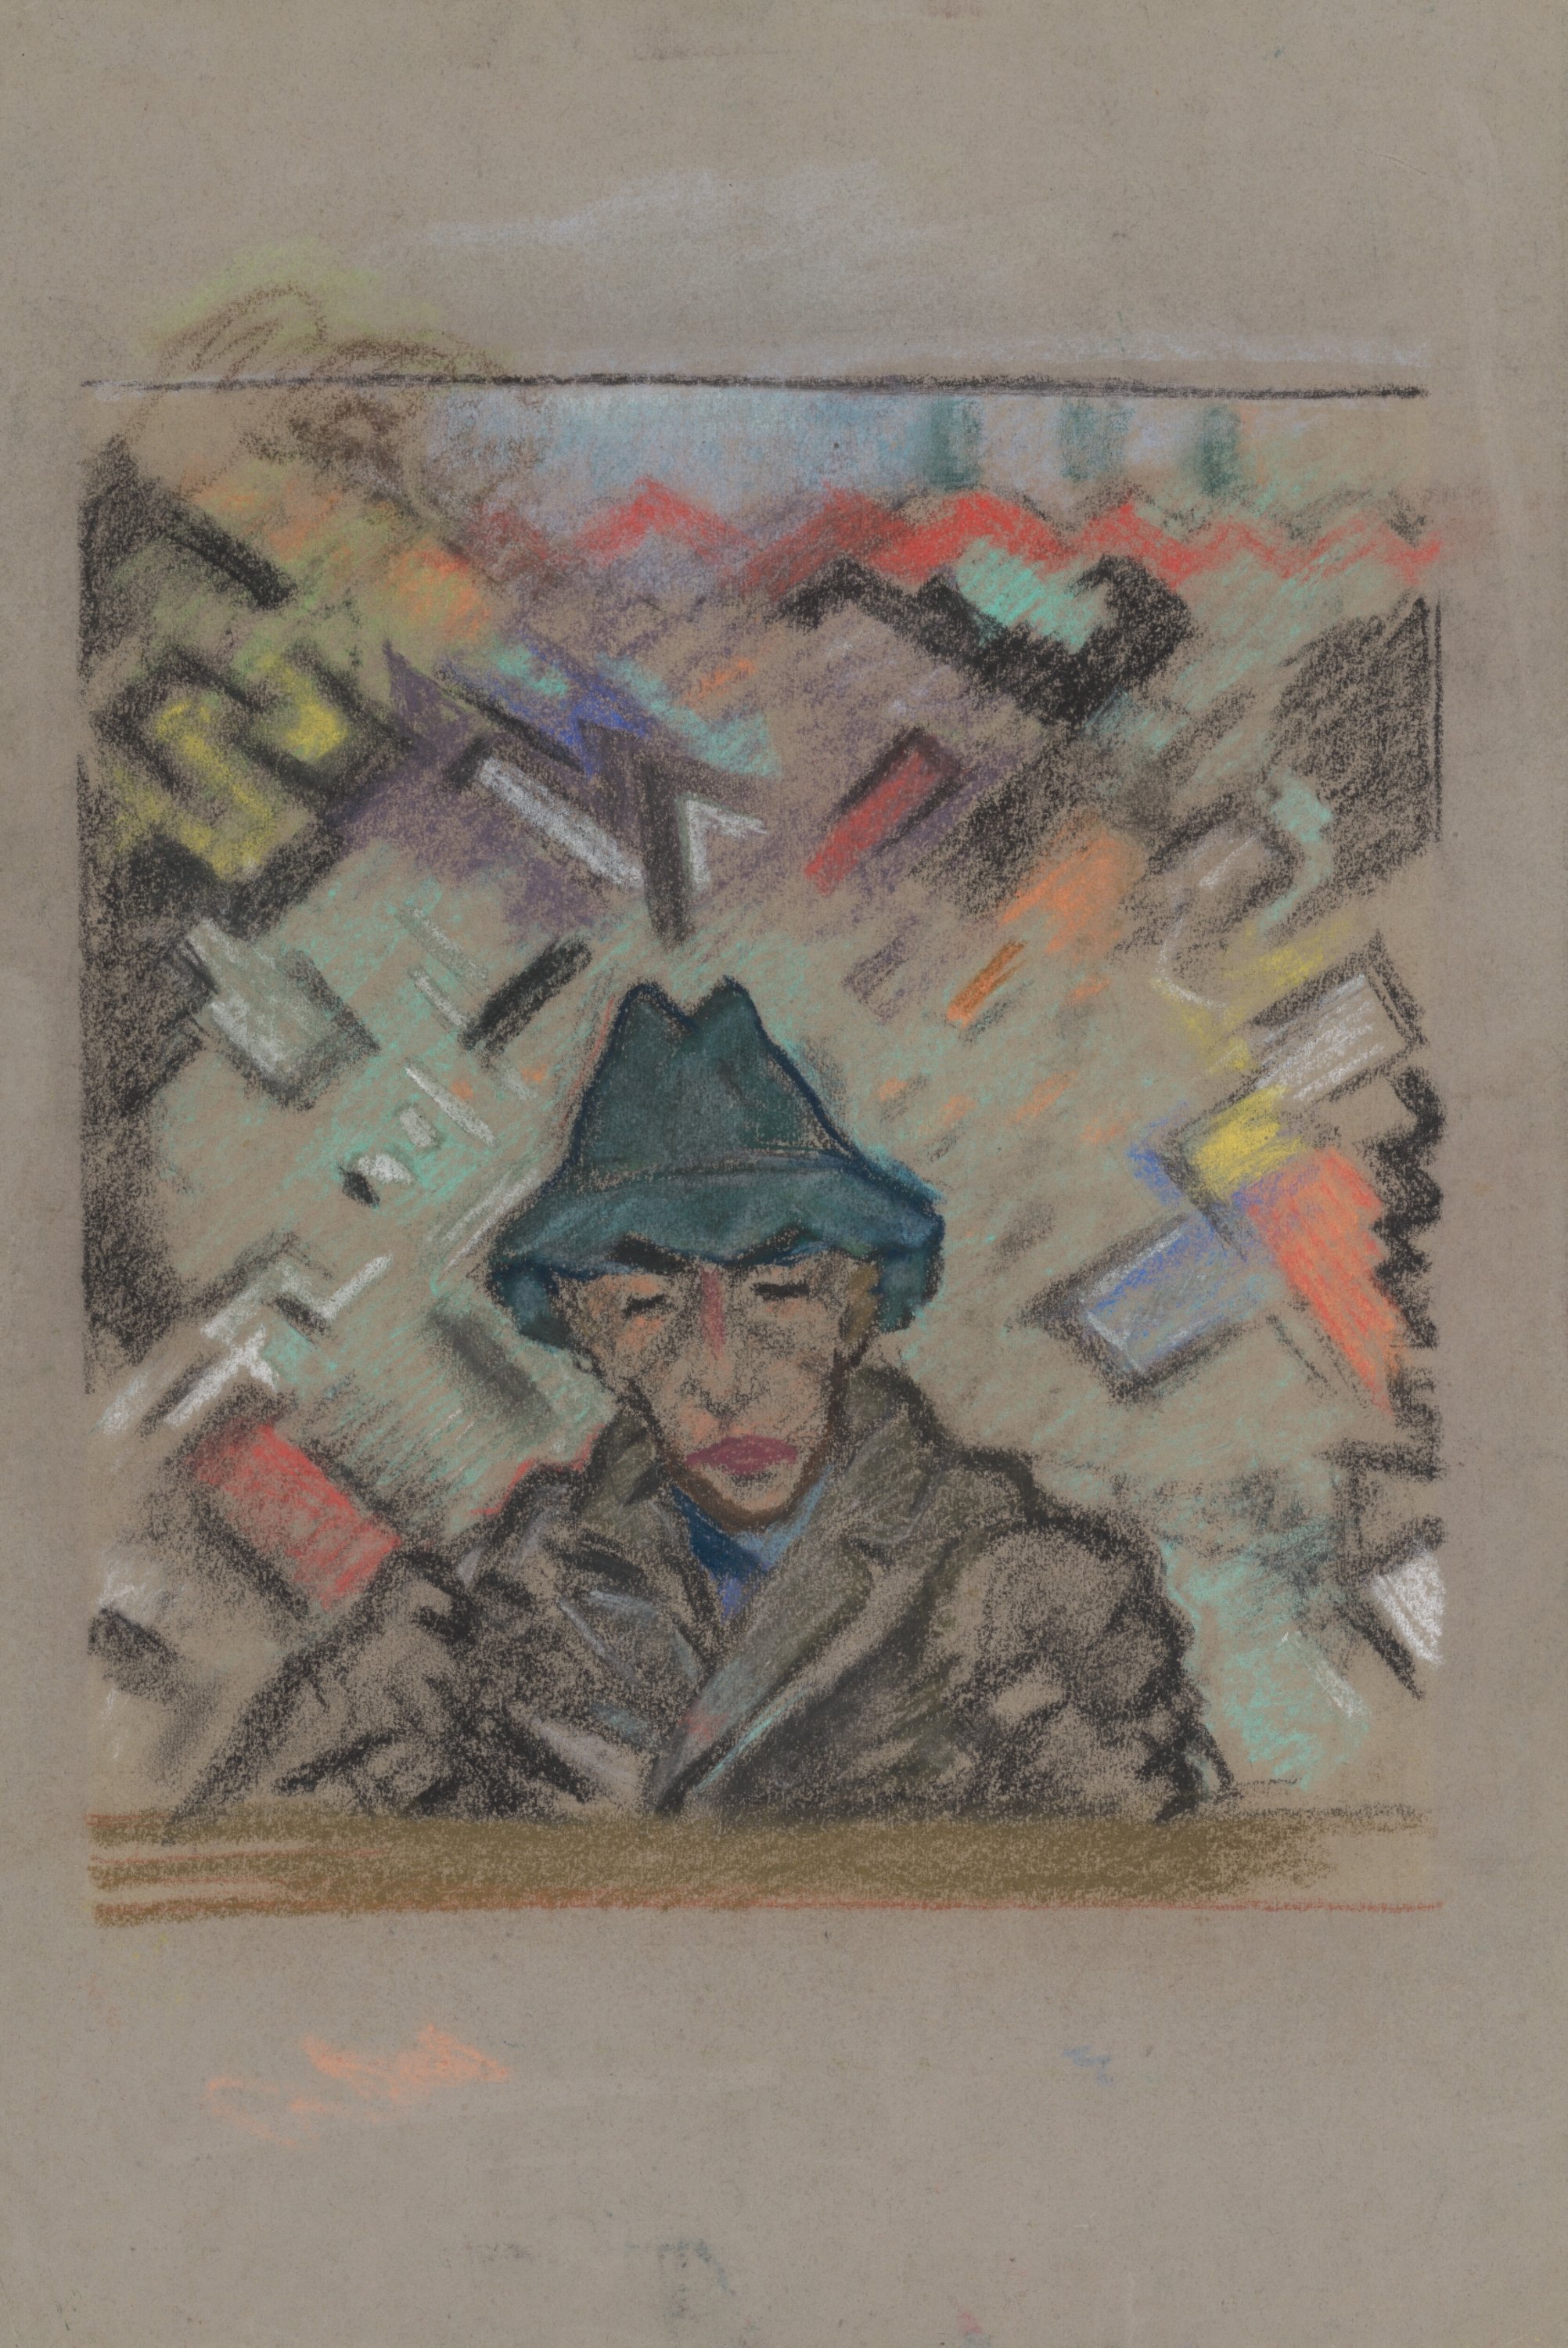 Bust of a Man in a Hat with Decorative Background (1937)